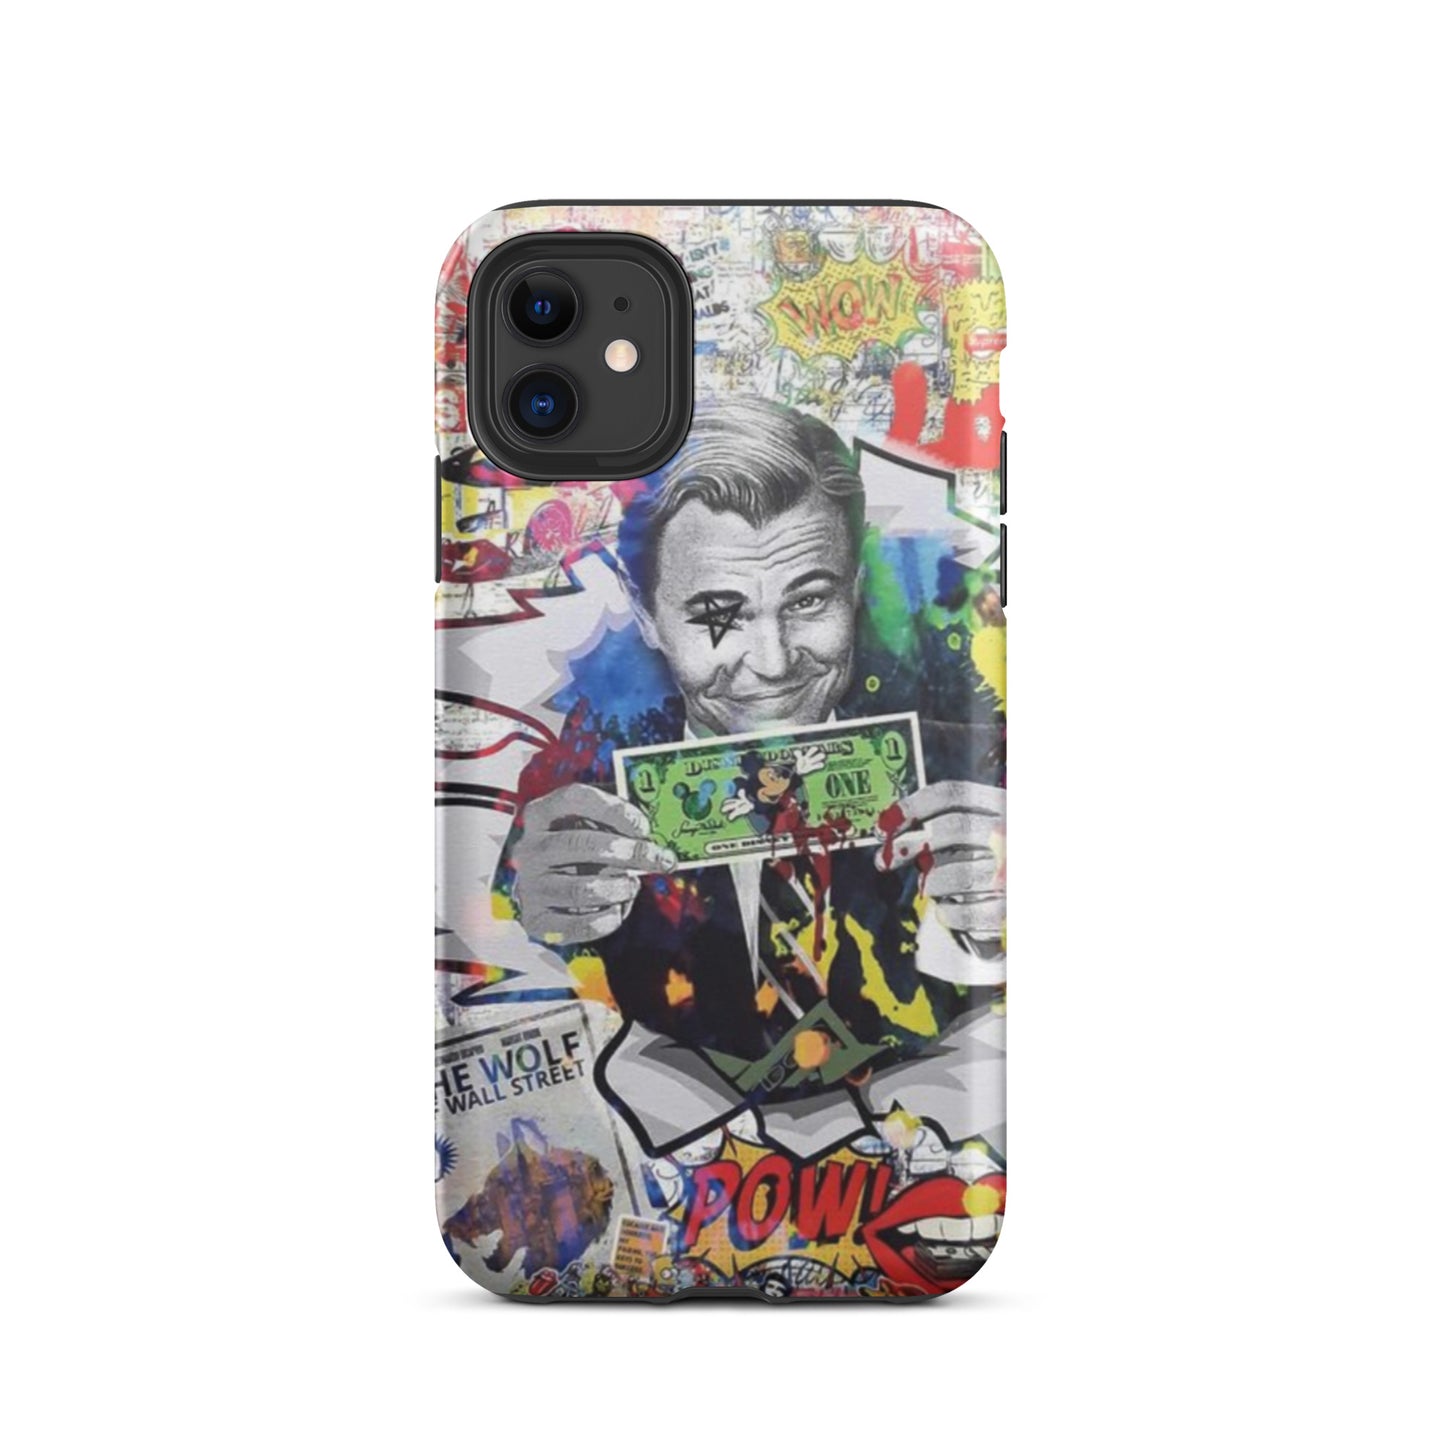 The Woofie iPhone case